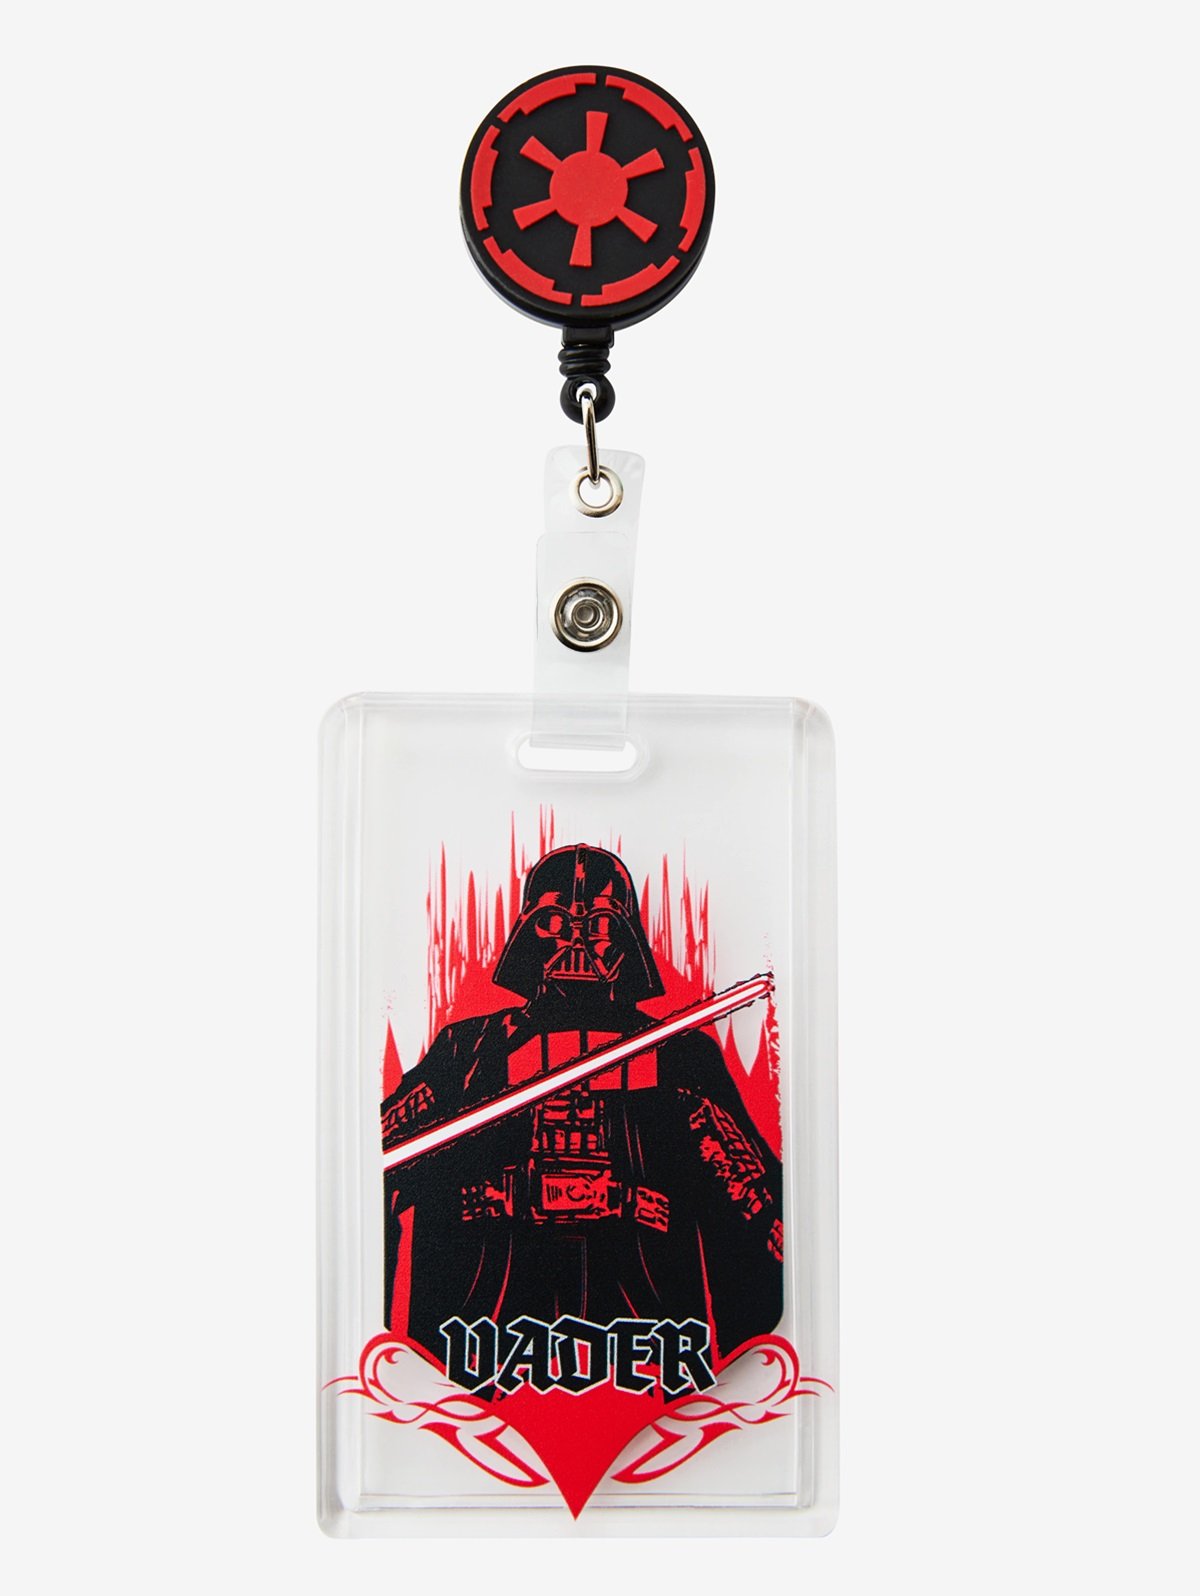 Lord Vader holds his lightsaber in this BoxLunch Star Wars lanyard for D23.